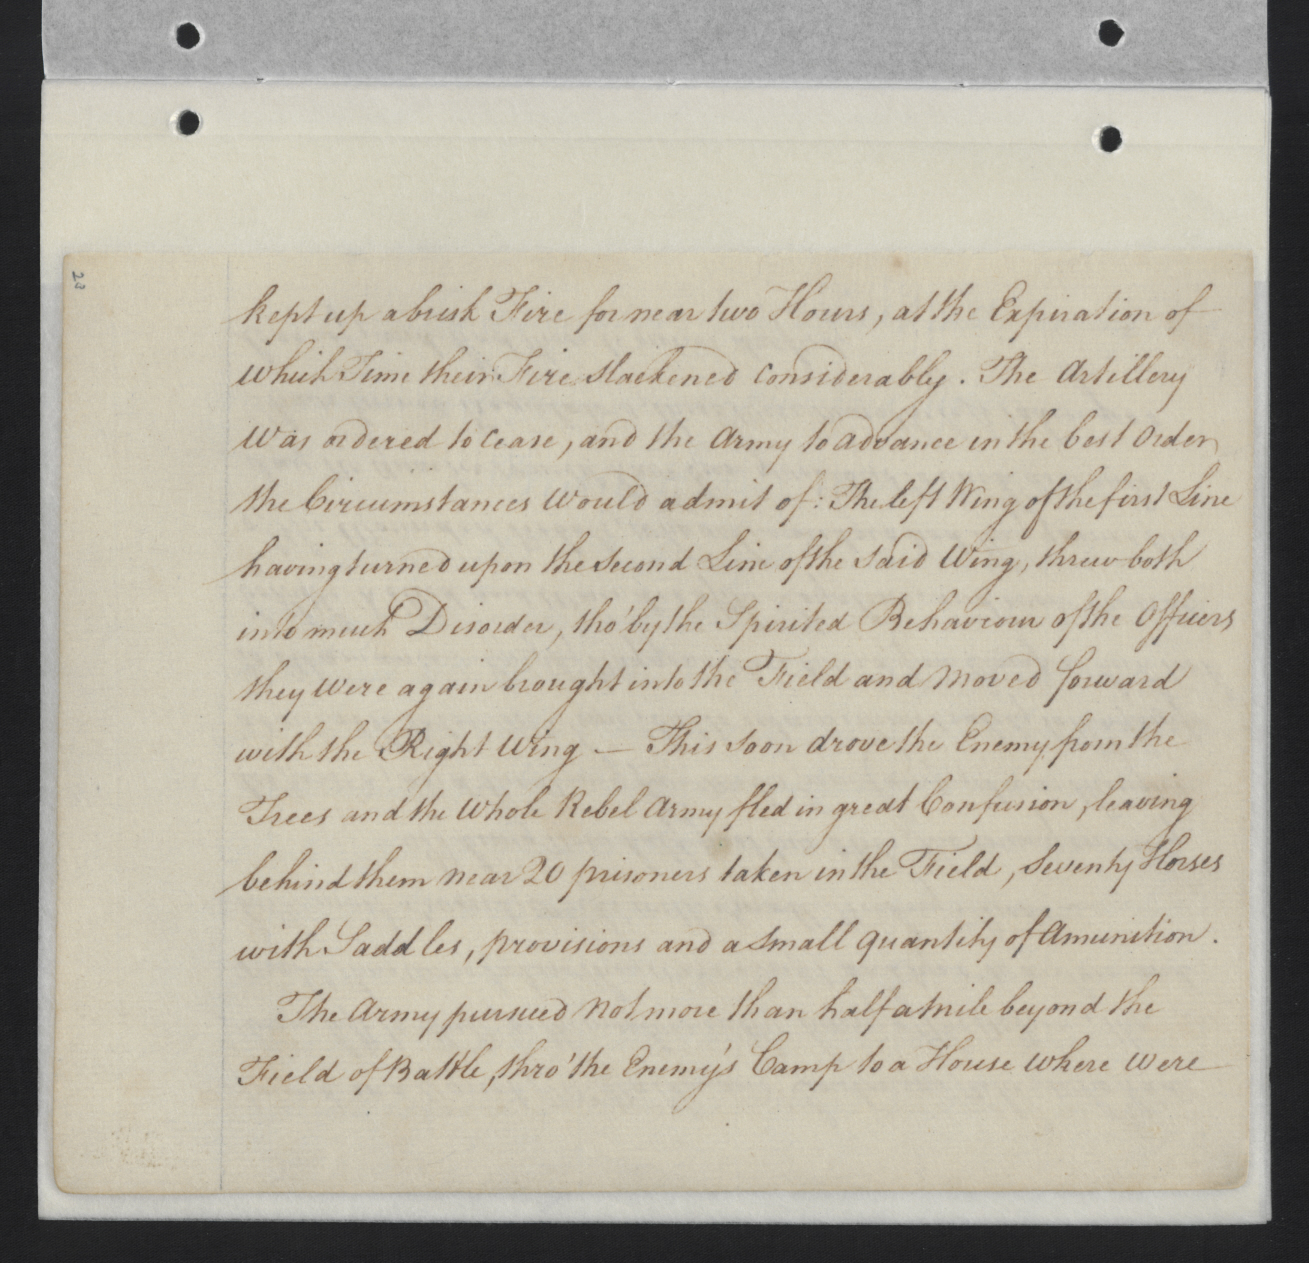 Journal Entry from William Tryon on the Expedition Against the Regulators, 16 May 1771, page 5.